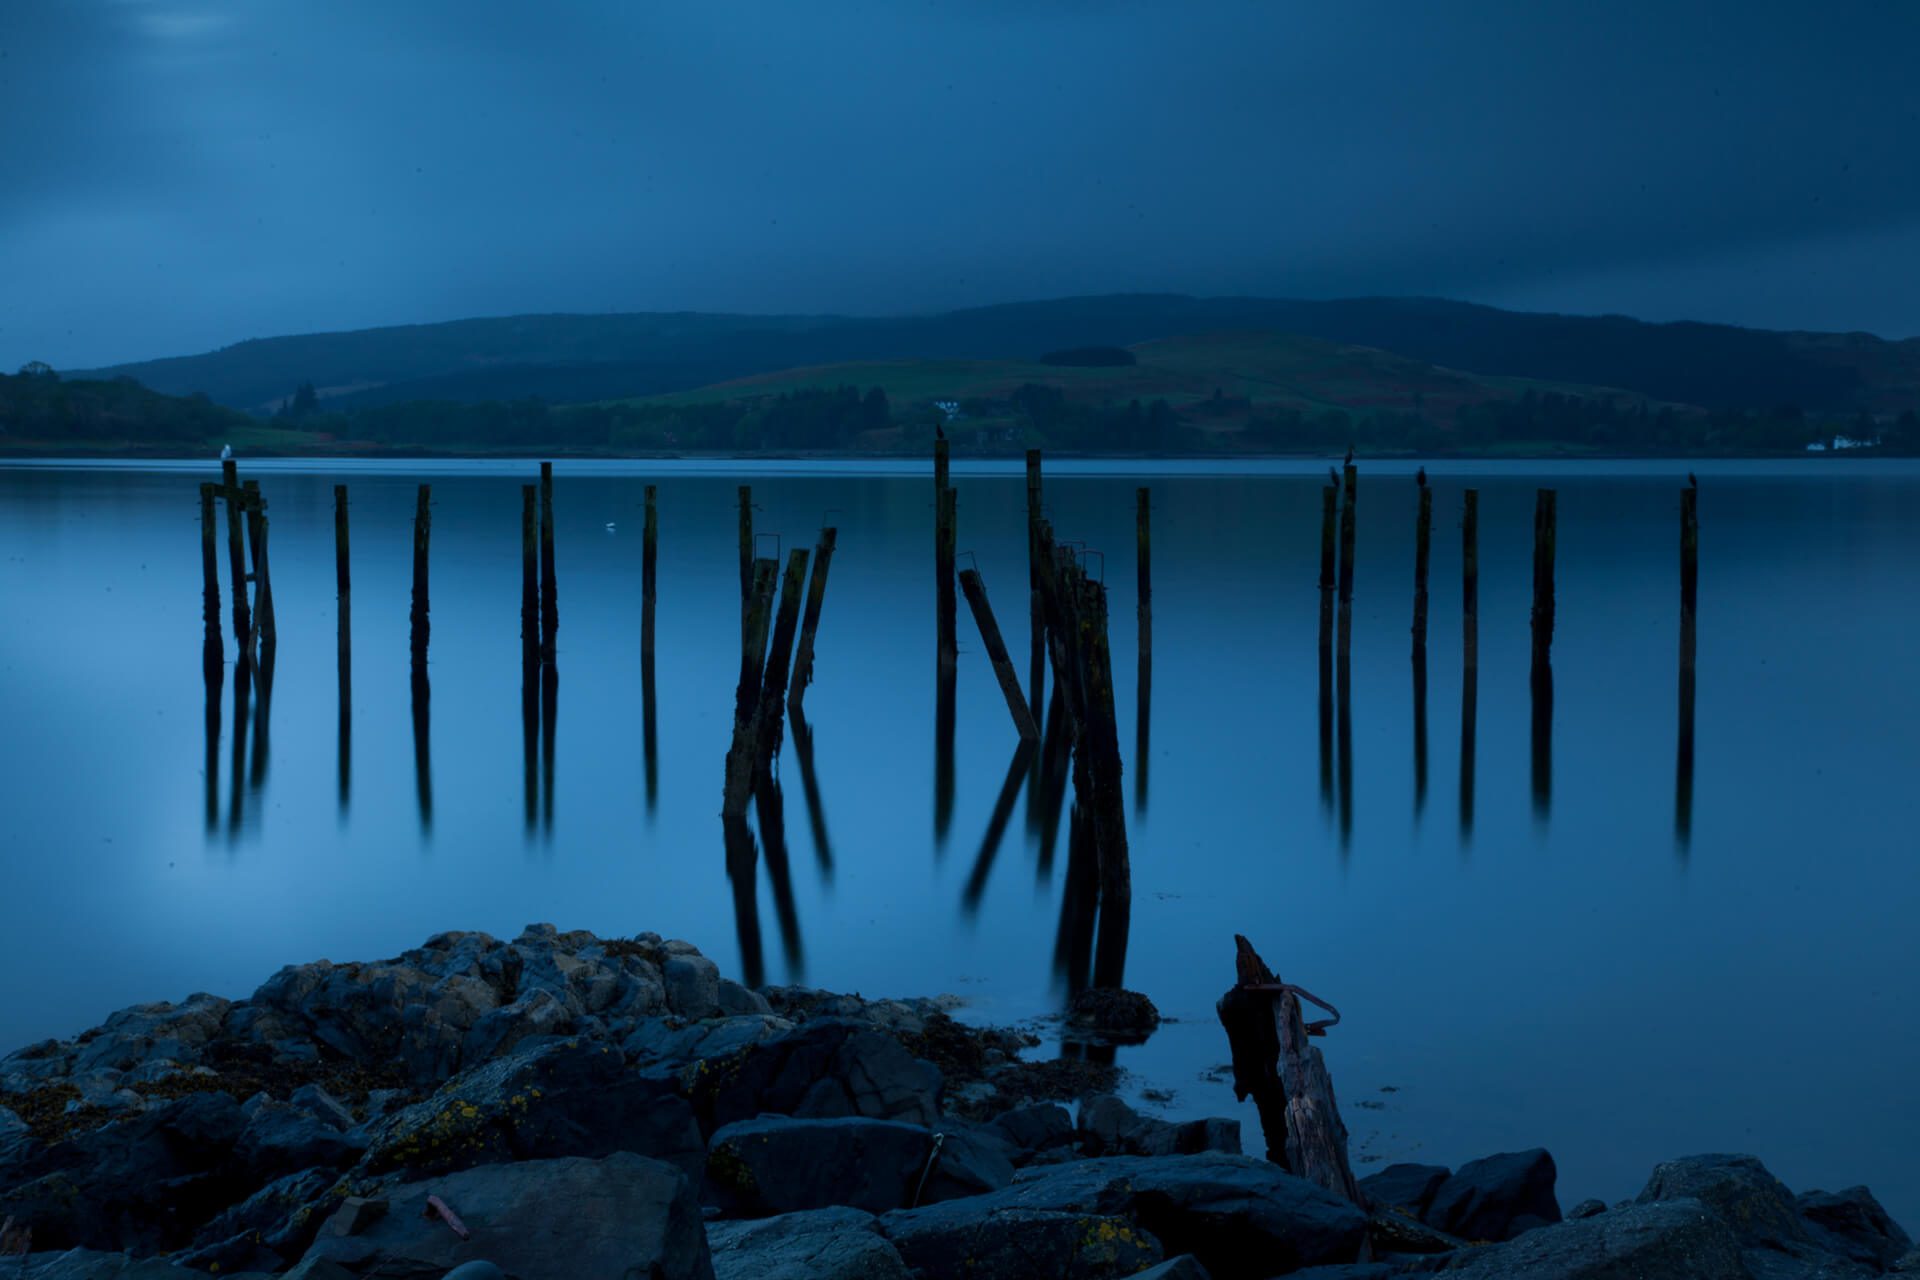 Early morning atmospheric shot of a derelict pier on the Island of Mull.